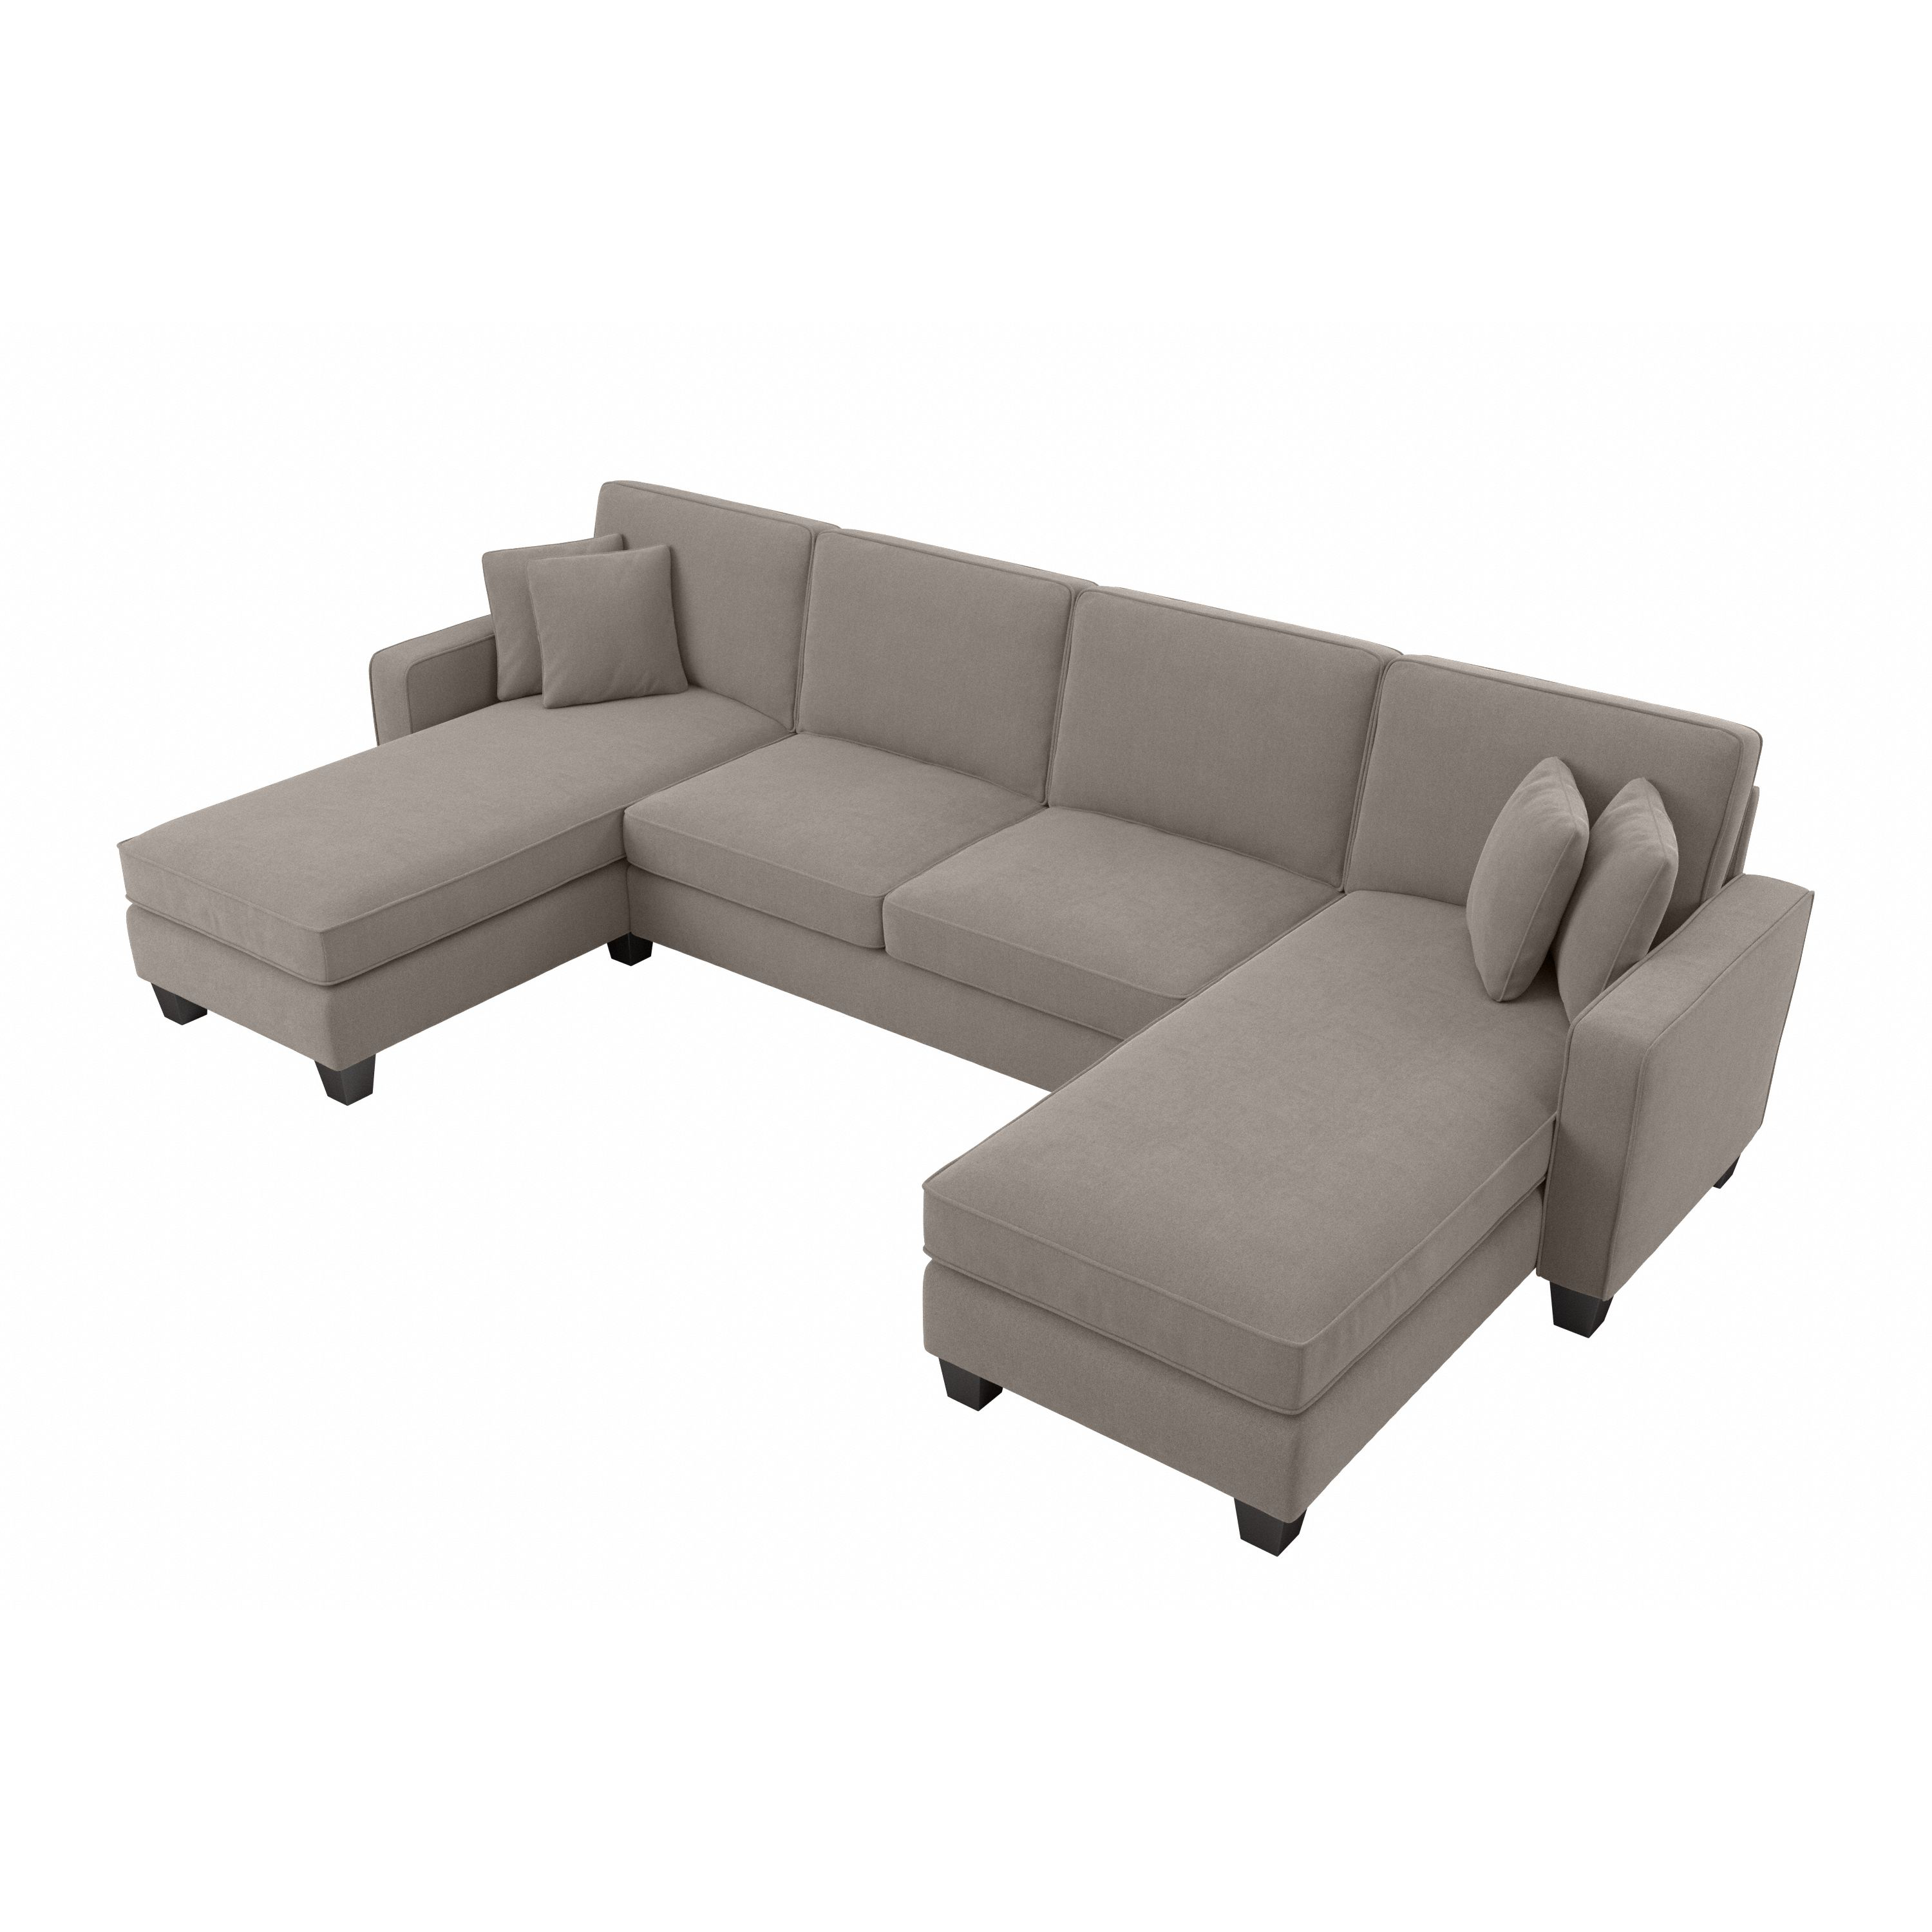 Shop Bush Furniture Stockton 131W Sectional Couch with Double Chaise Lounge 02 SNY130SBGH-03K #color_beige herringbone fabric